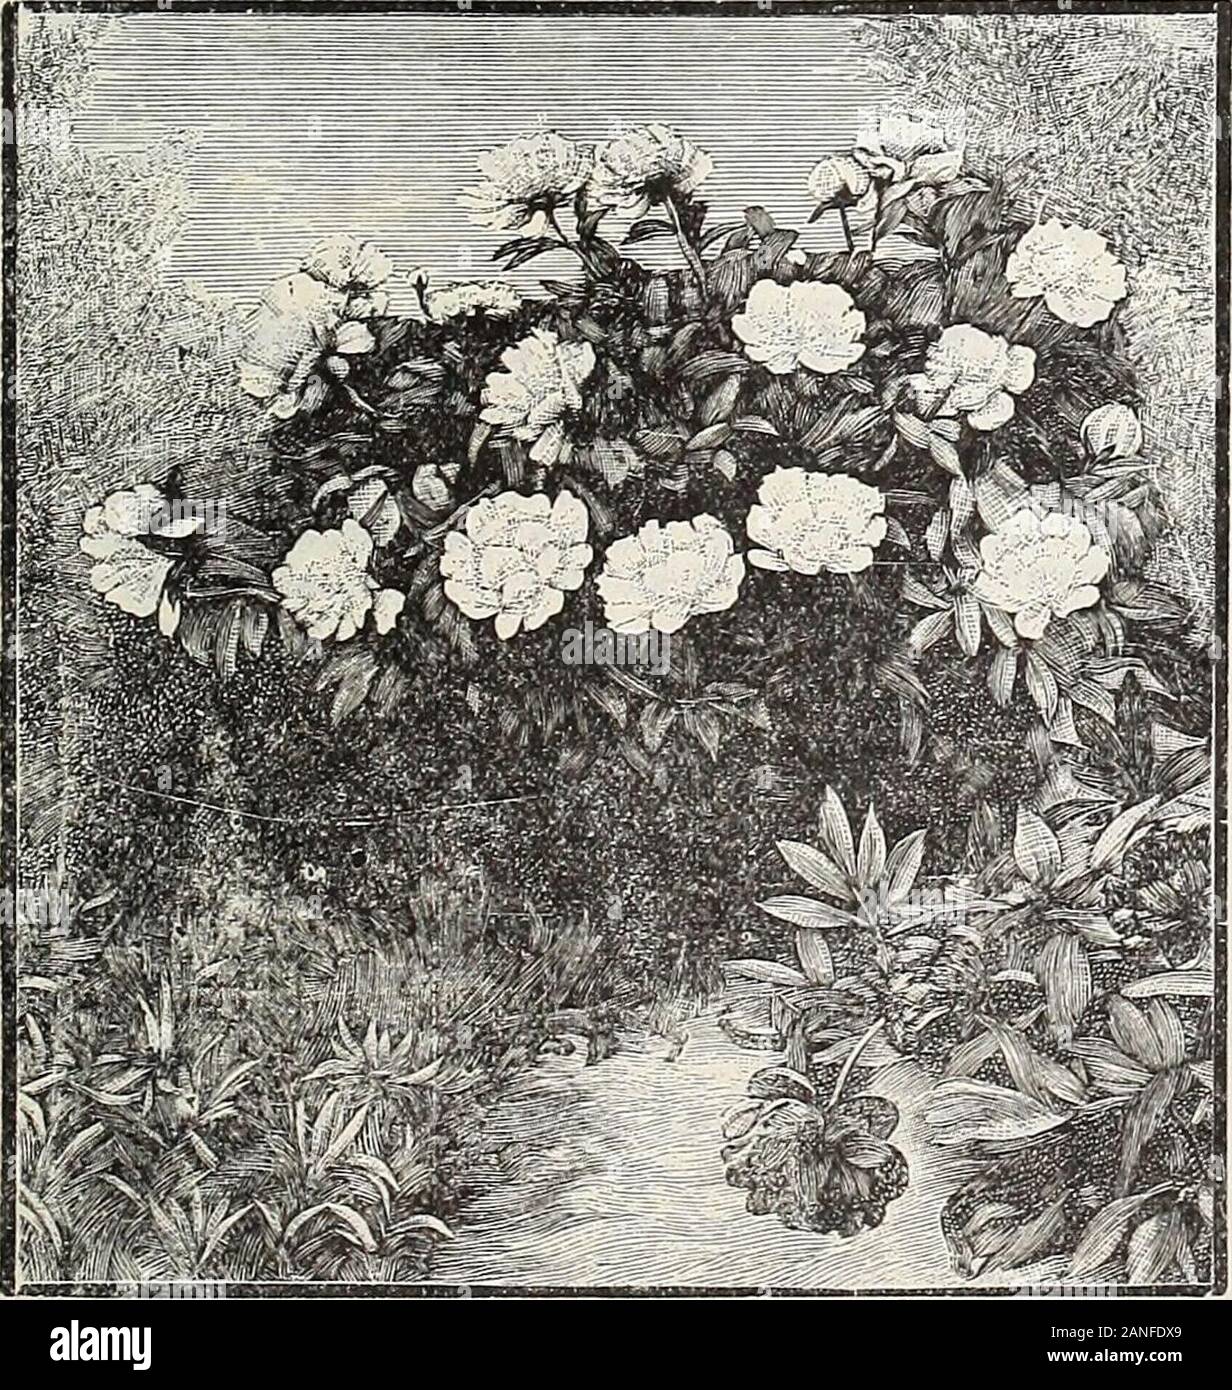 Dreer's 72nd annual edition garden book : 1910 . doz. HARDY ORCHIDS. There is a wealth of beauty in this little cultivated class ofplants. The sorts offered below are quite hardy, and succeedbest in a partially shaded position in a deep, moist soil composedof equal parts of loam, leaf-mould and sand. Cypripedium acaule (Ladys Slipper). Broad, oval fol-iage, and showy, bright pink, lighter veined, curiously-formedflowers. 25 cts. each. — pubescens (Yellow Ladys Slipper). Large, showy,bright yellow. 25 cts. each. — spectabile (Moccasin-Floicer, or Shoicy Lady Slipper).Clusters of beautiful white Stock Photo